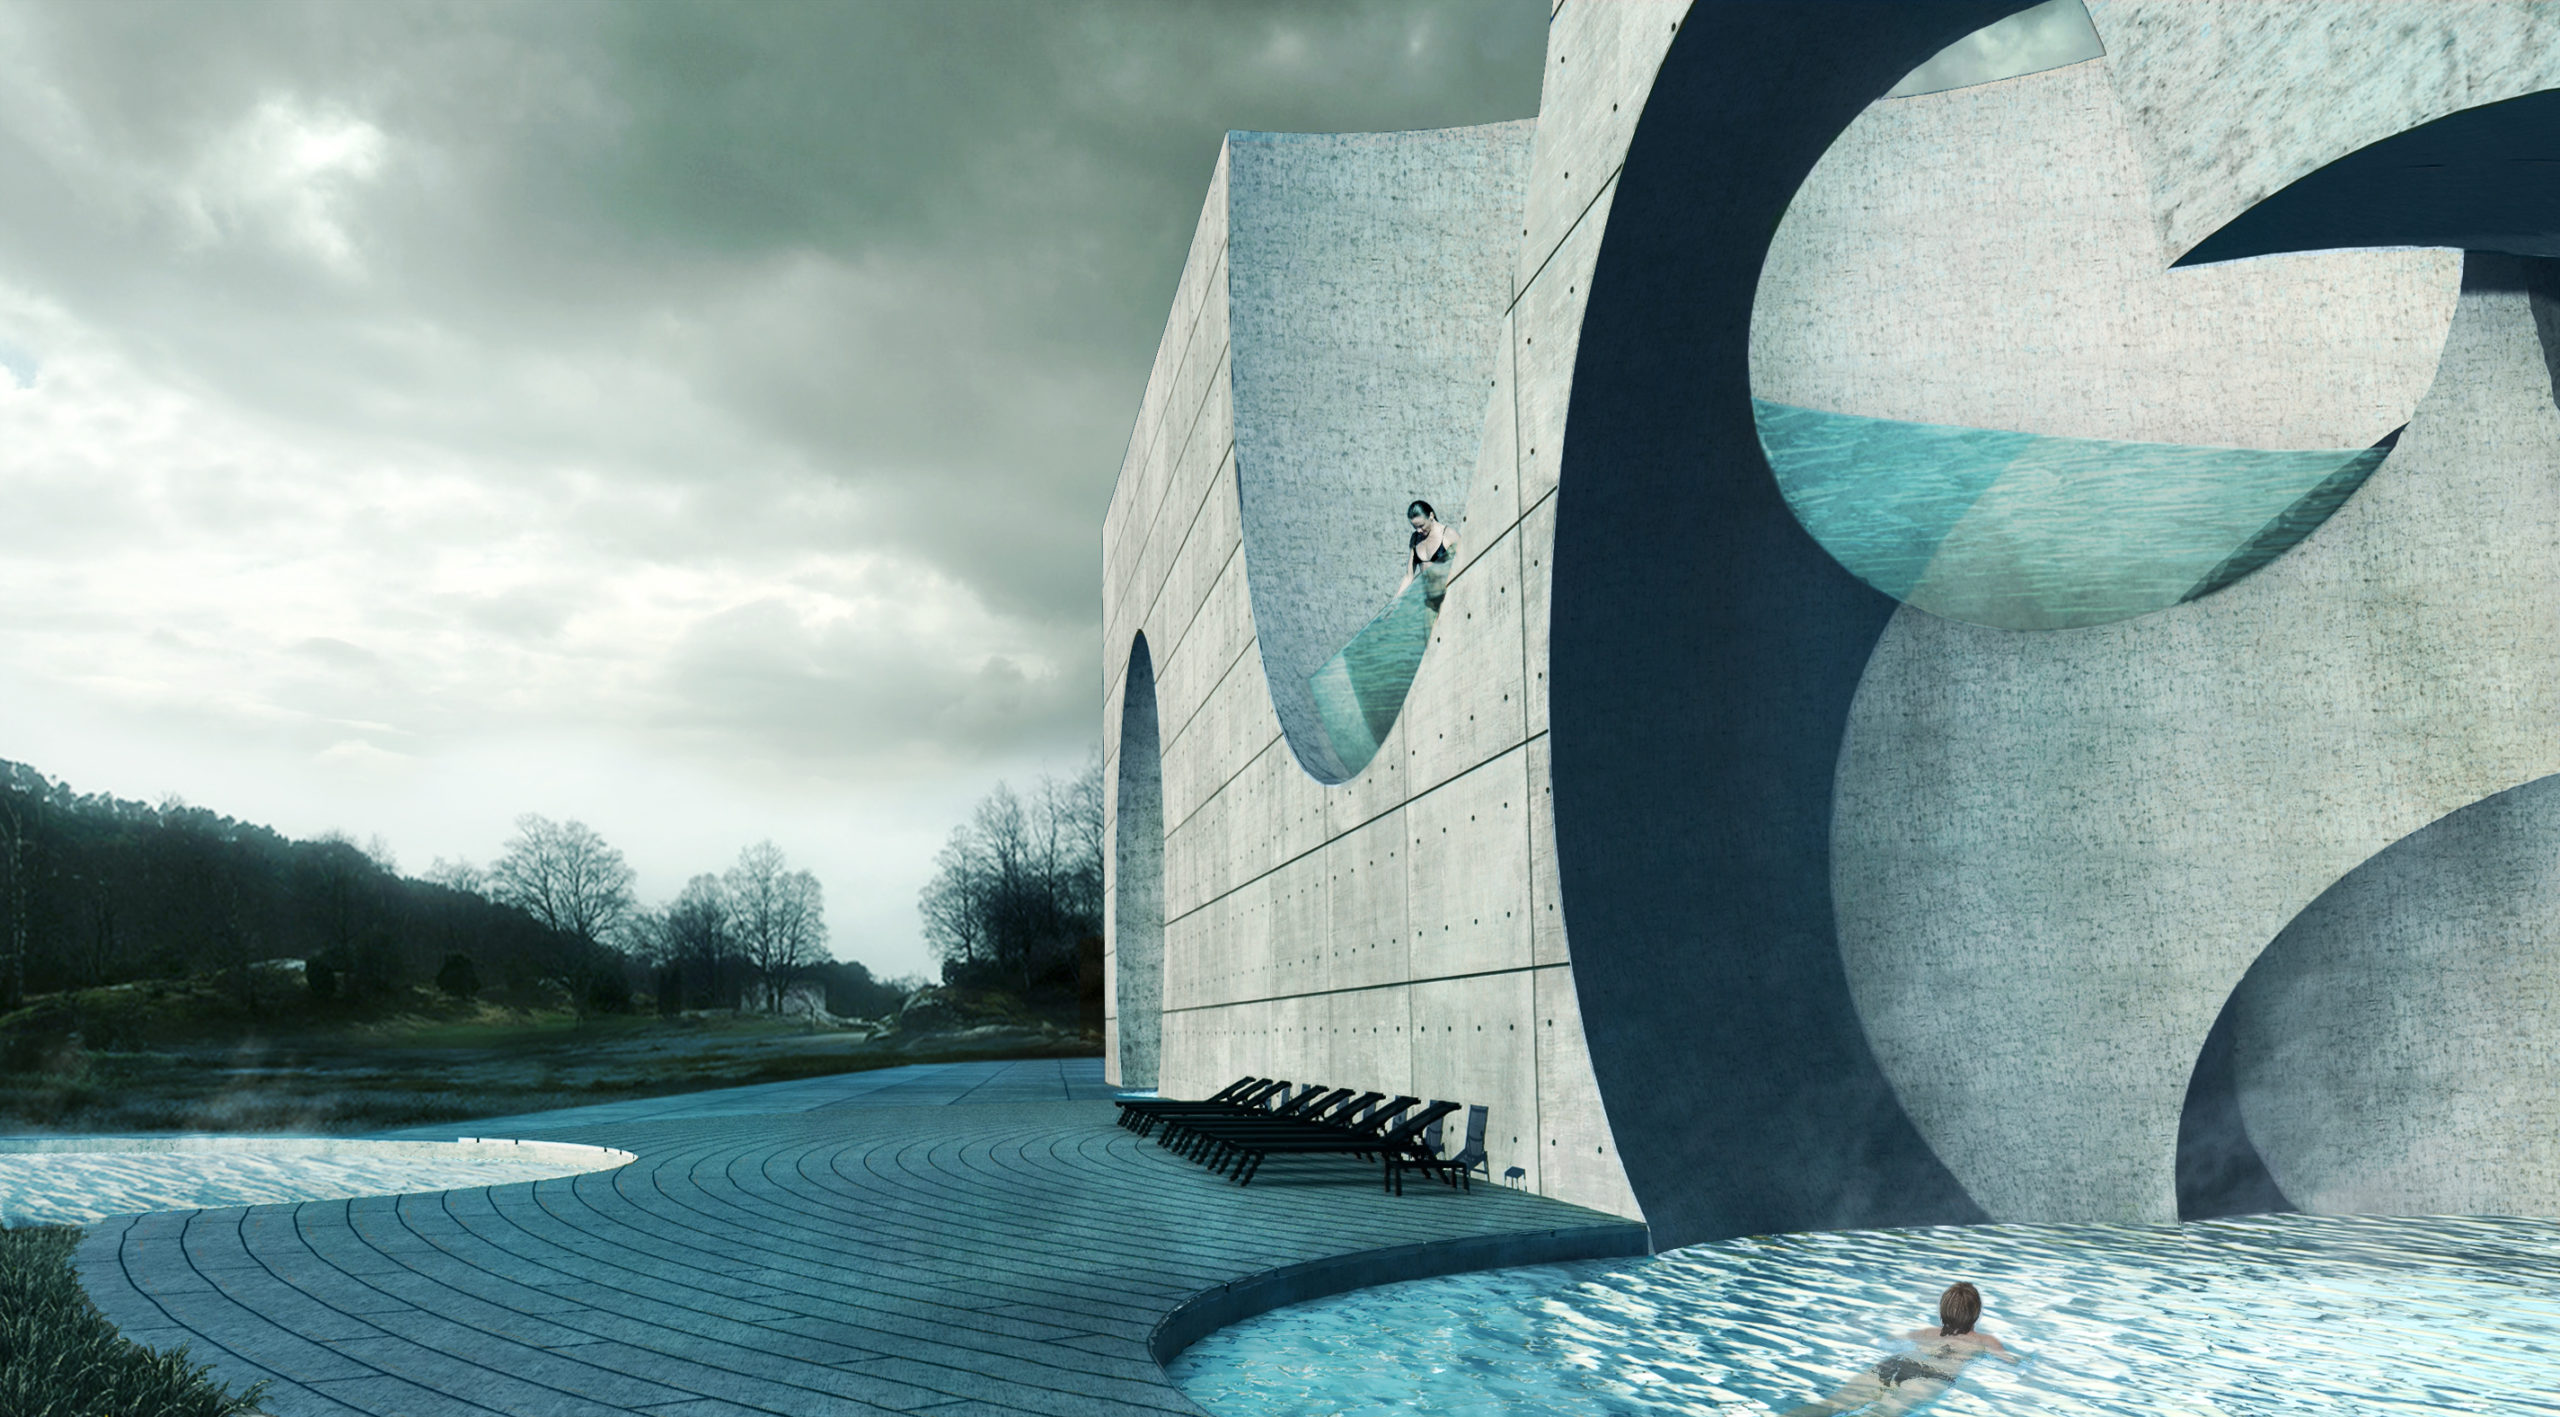 SPA Design, new experience of wellness - èdoc architects